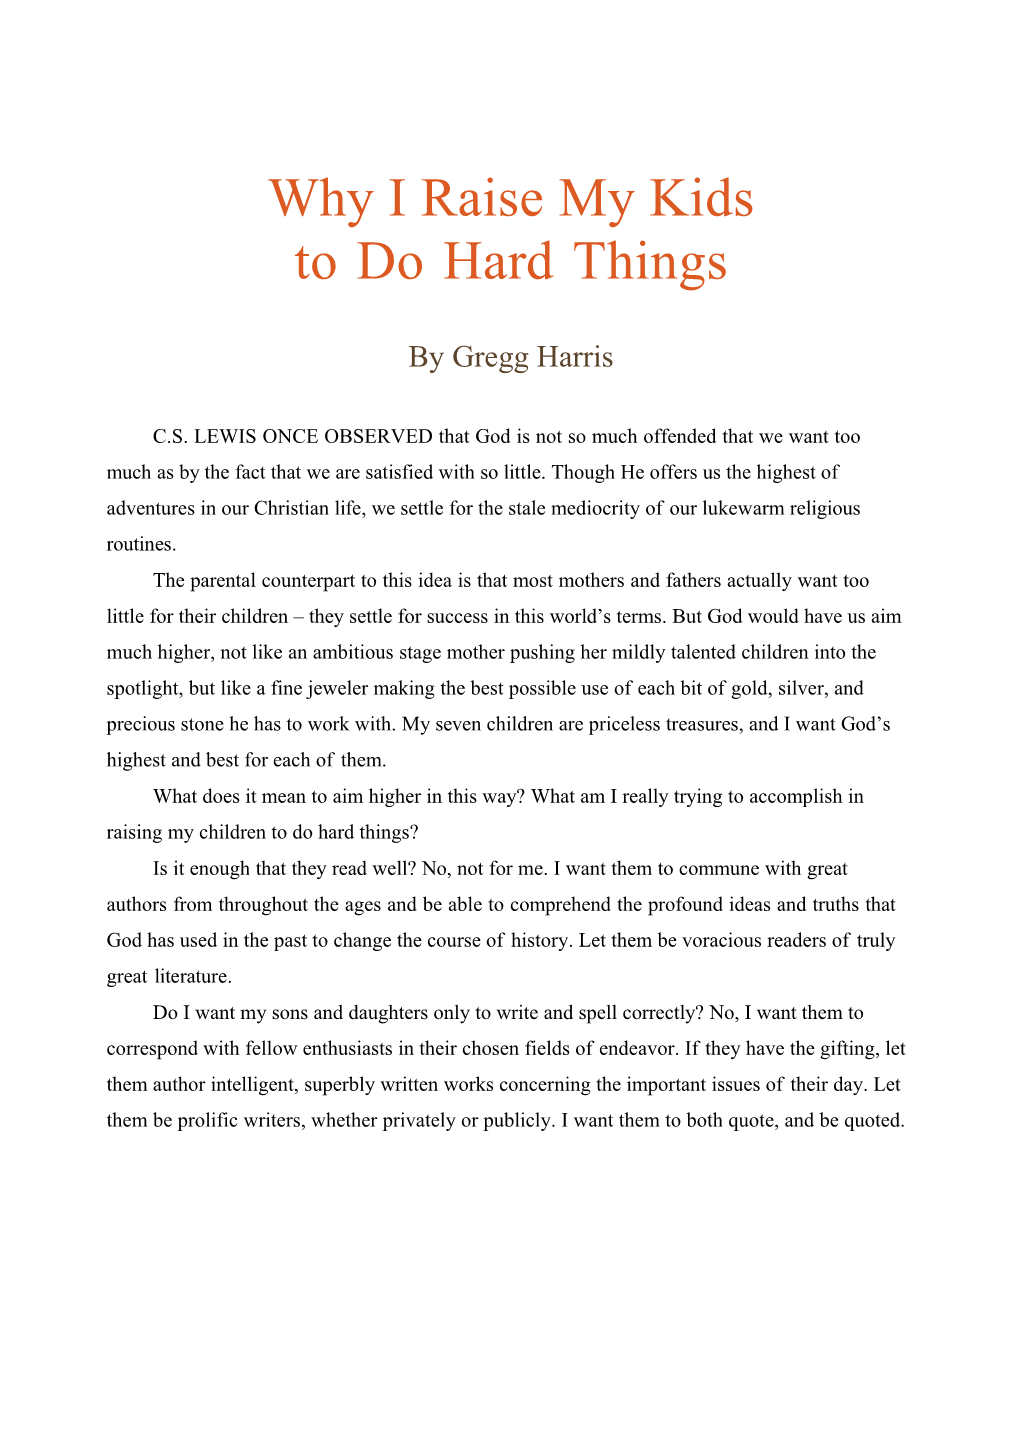 Why I Raise My Kids to Do Hard Things